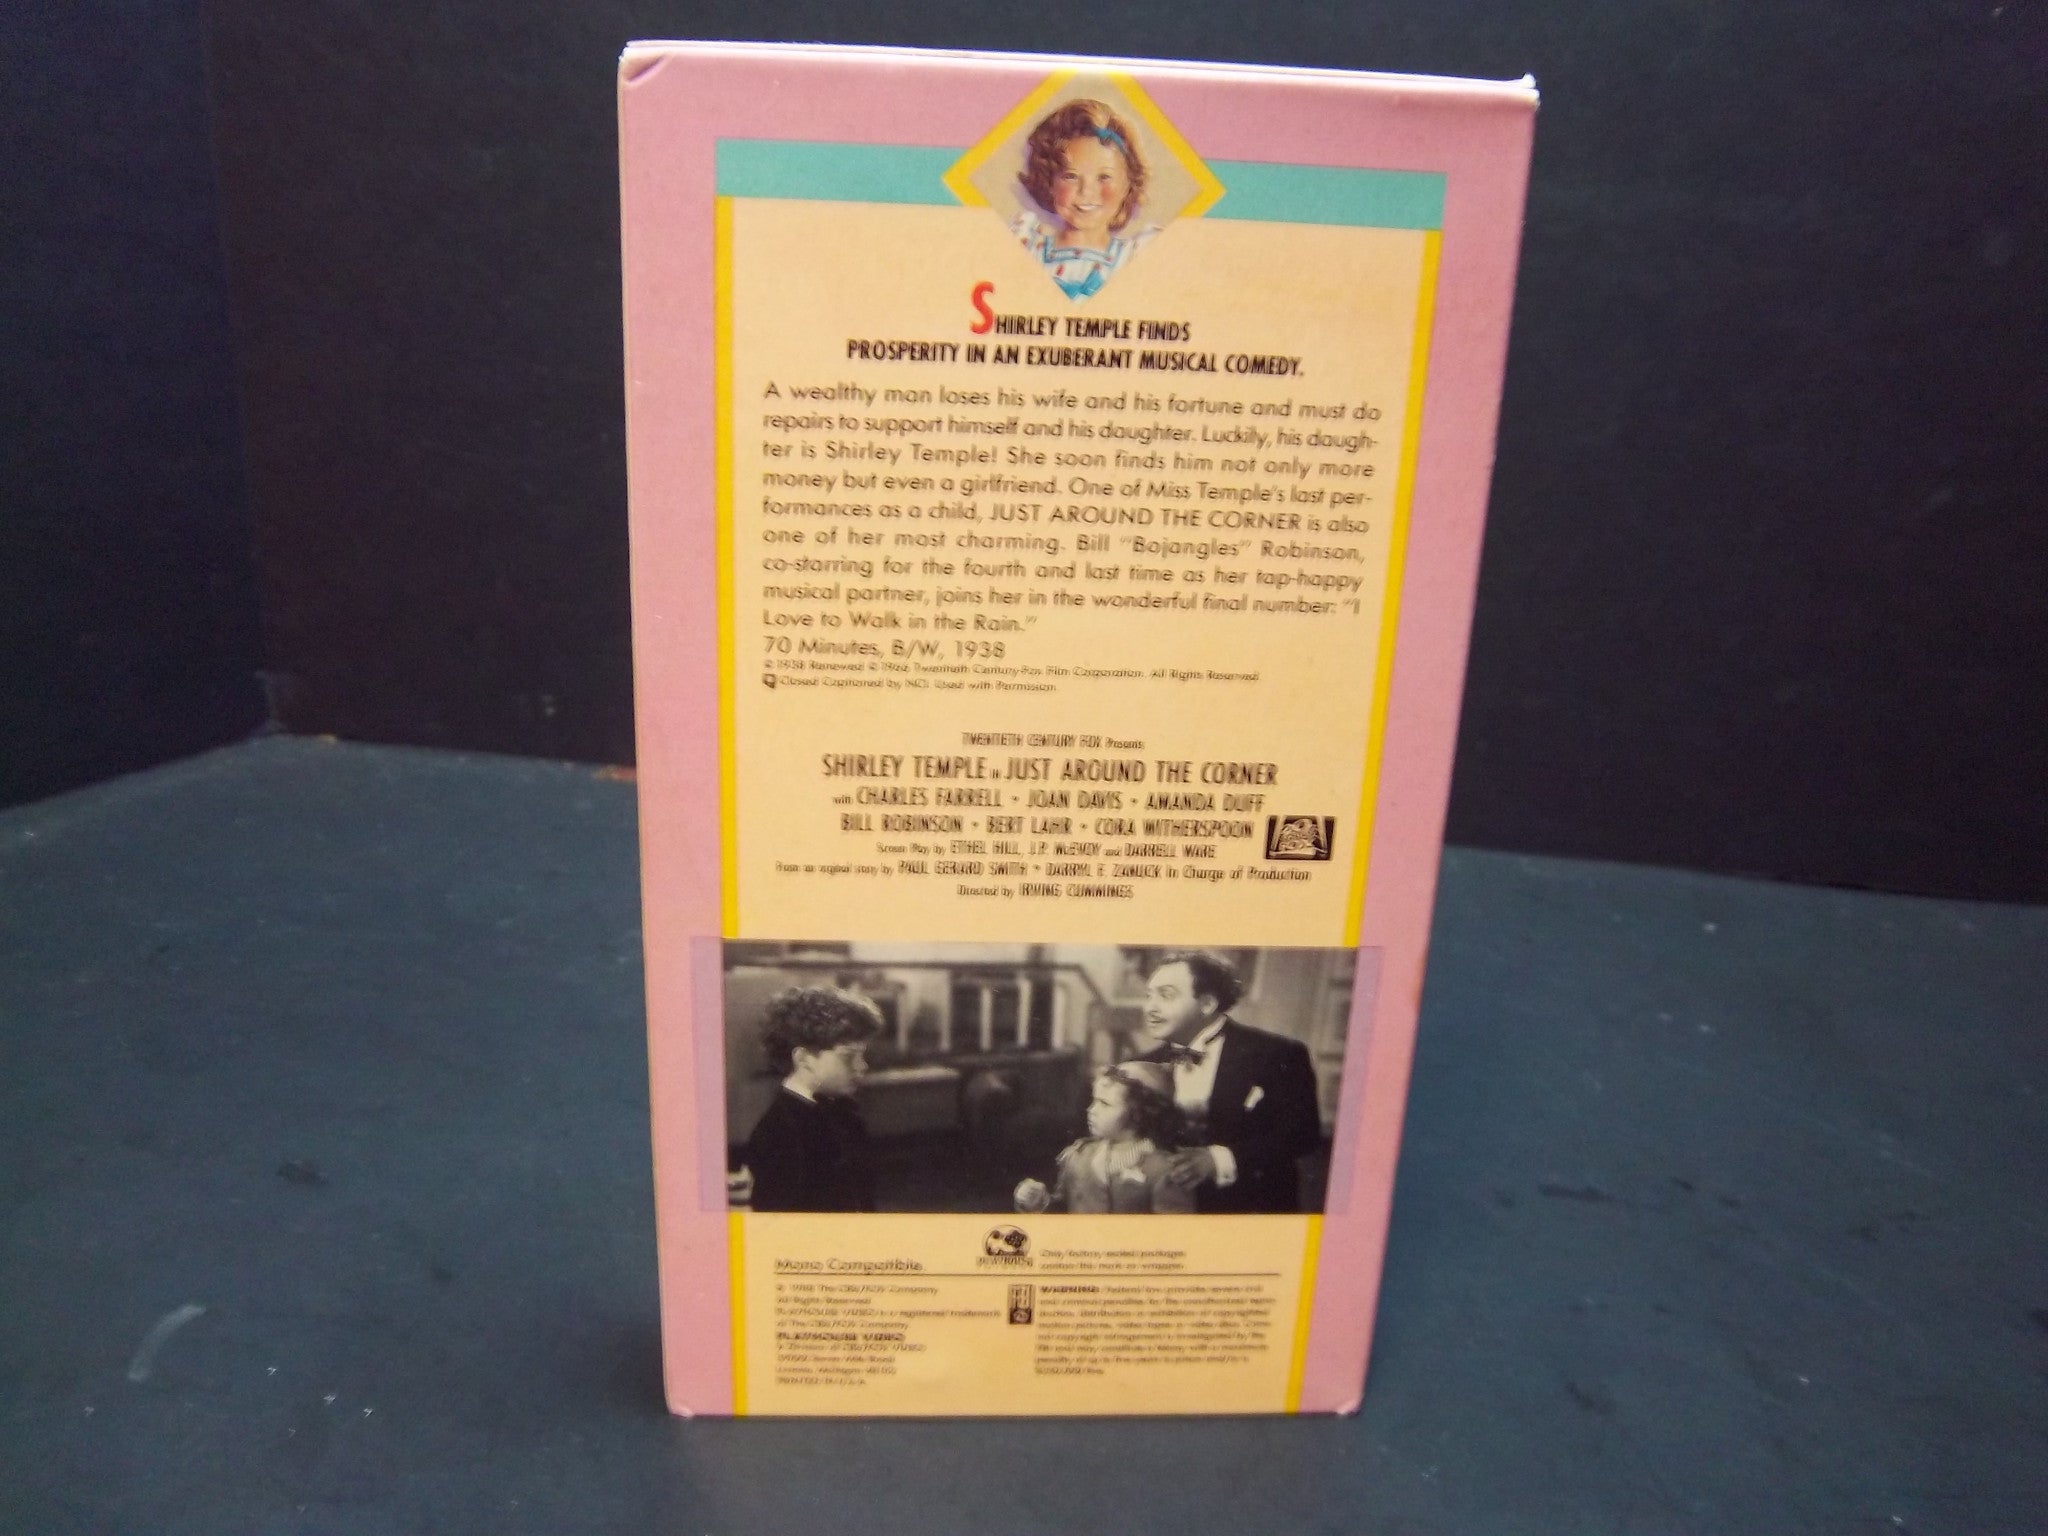 Just Around the Corner 1938 (1988 VHS) Shirley Temple